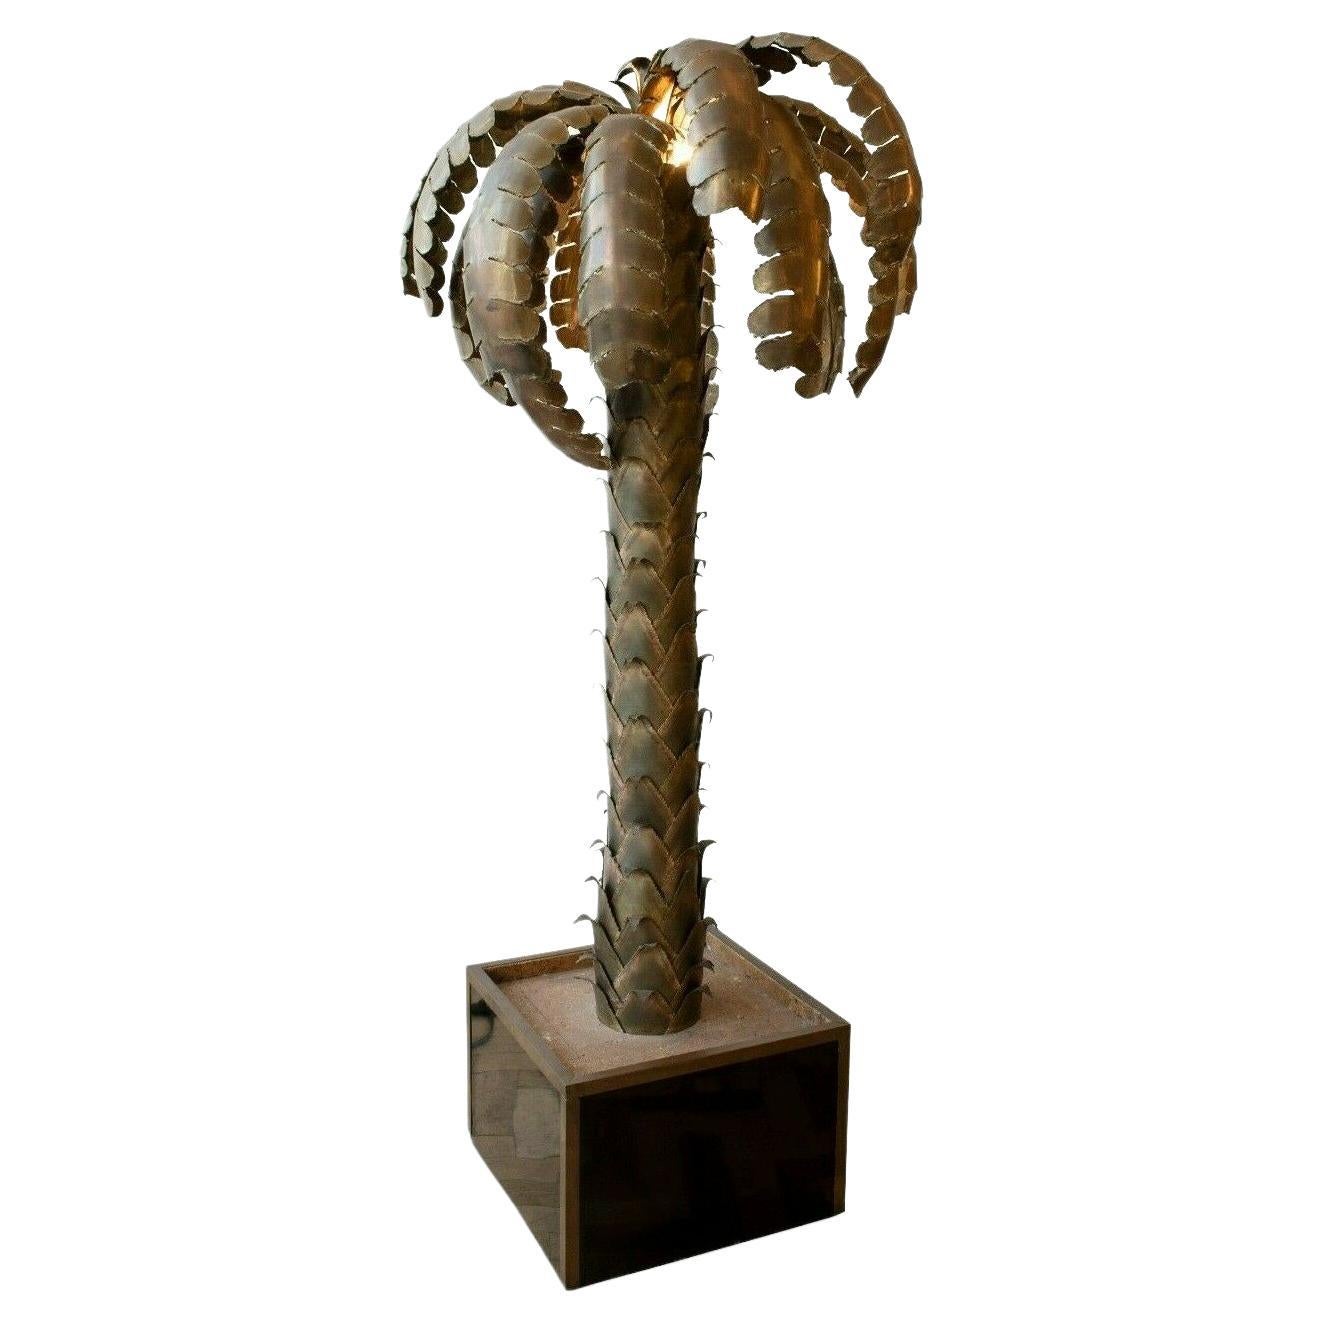 1970s French Hollywood Regency Style Brass Palm Tree Floor Lamp by Maison Jansen